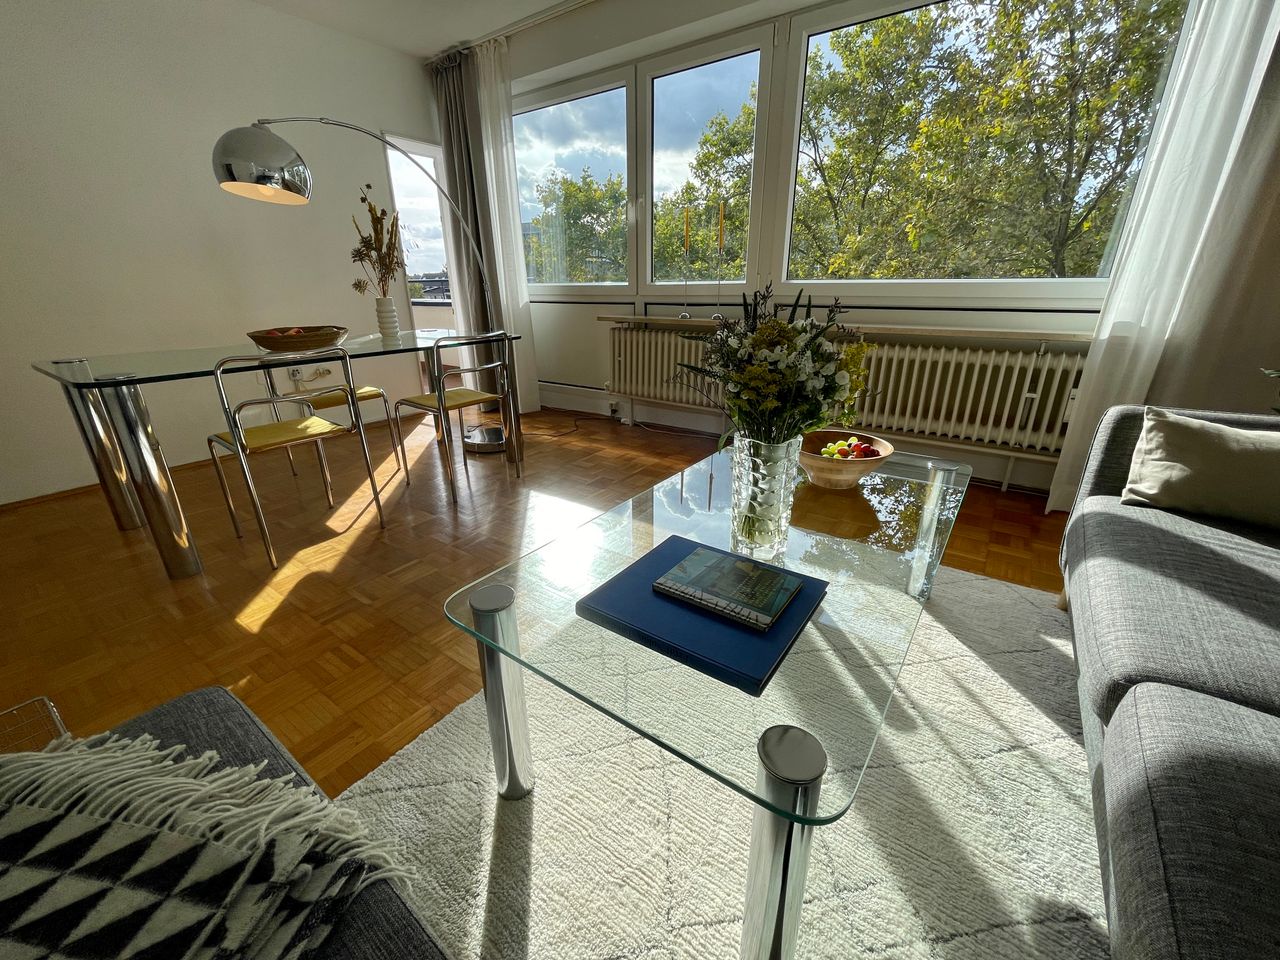 Sunny, spacious apartment with balcony, lift and garage in the centre of the old town